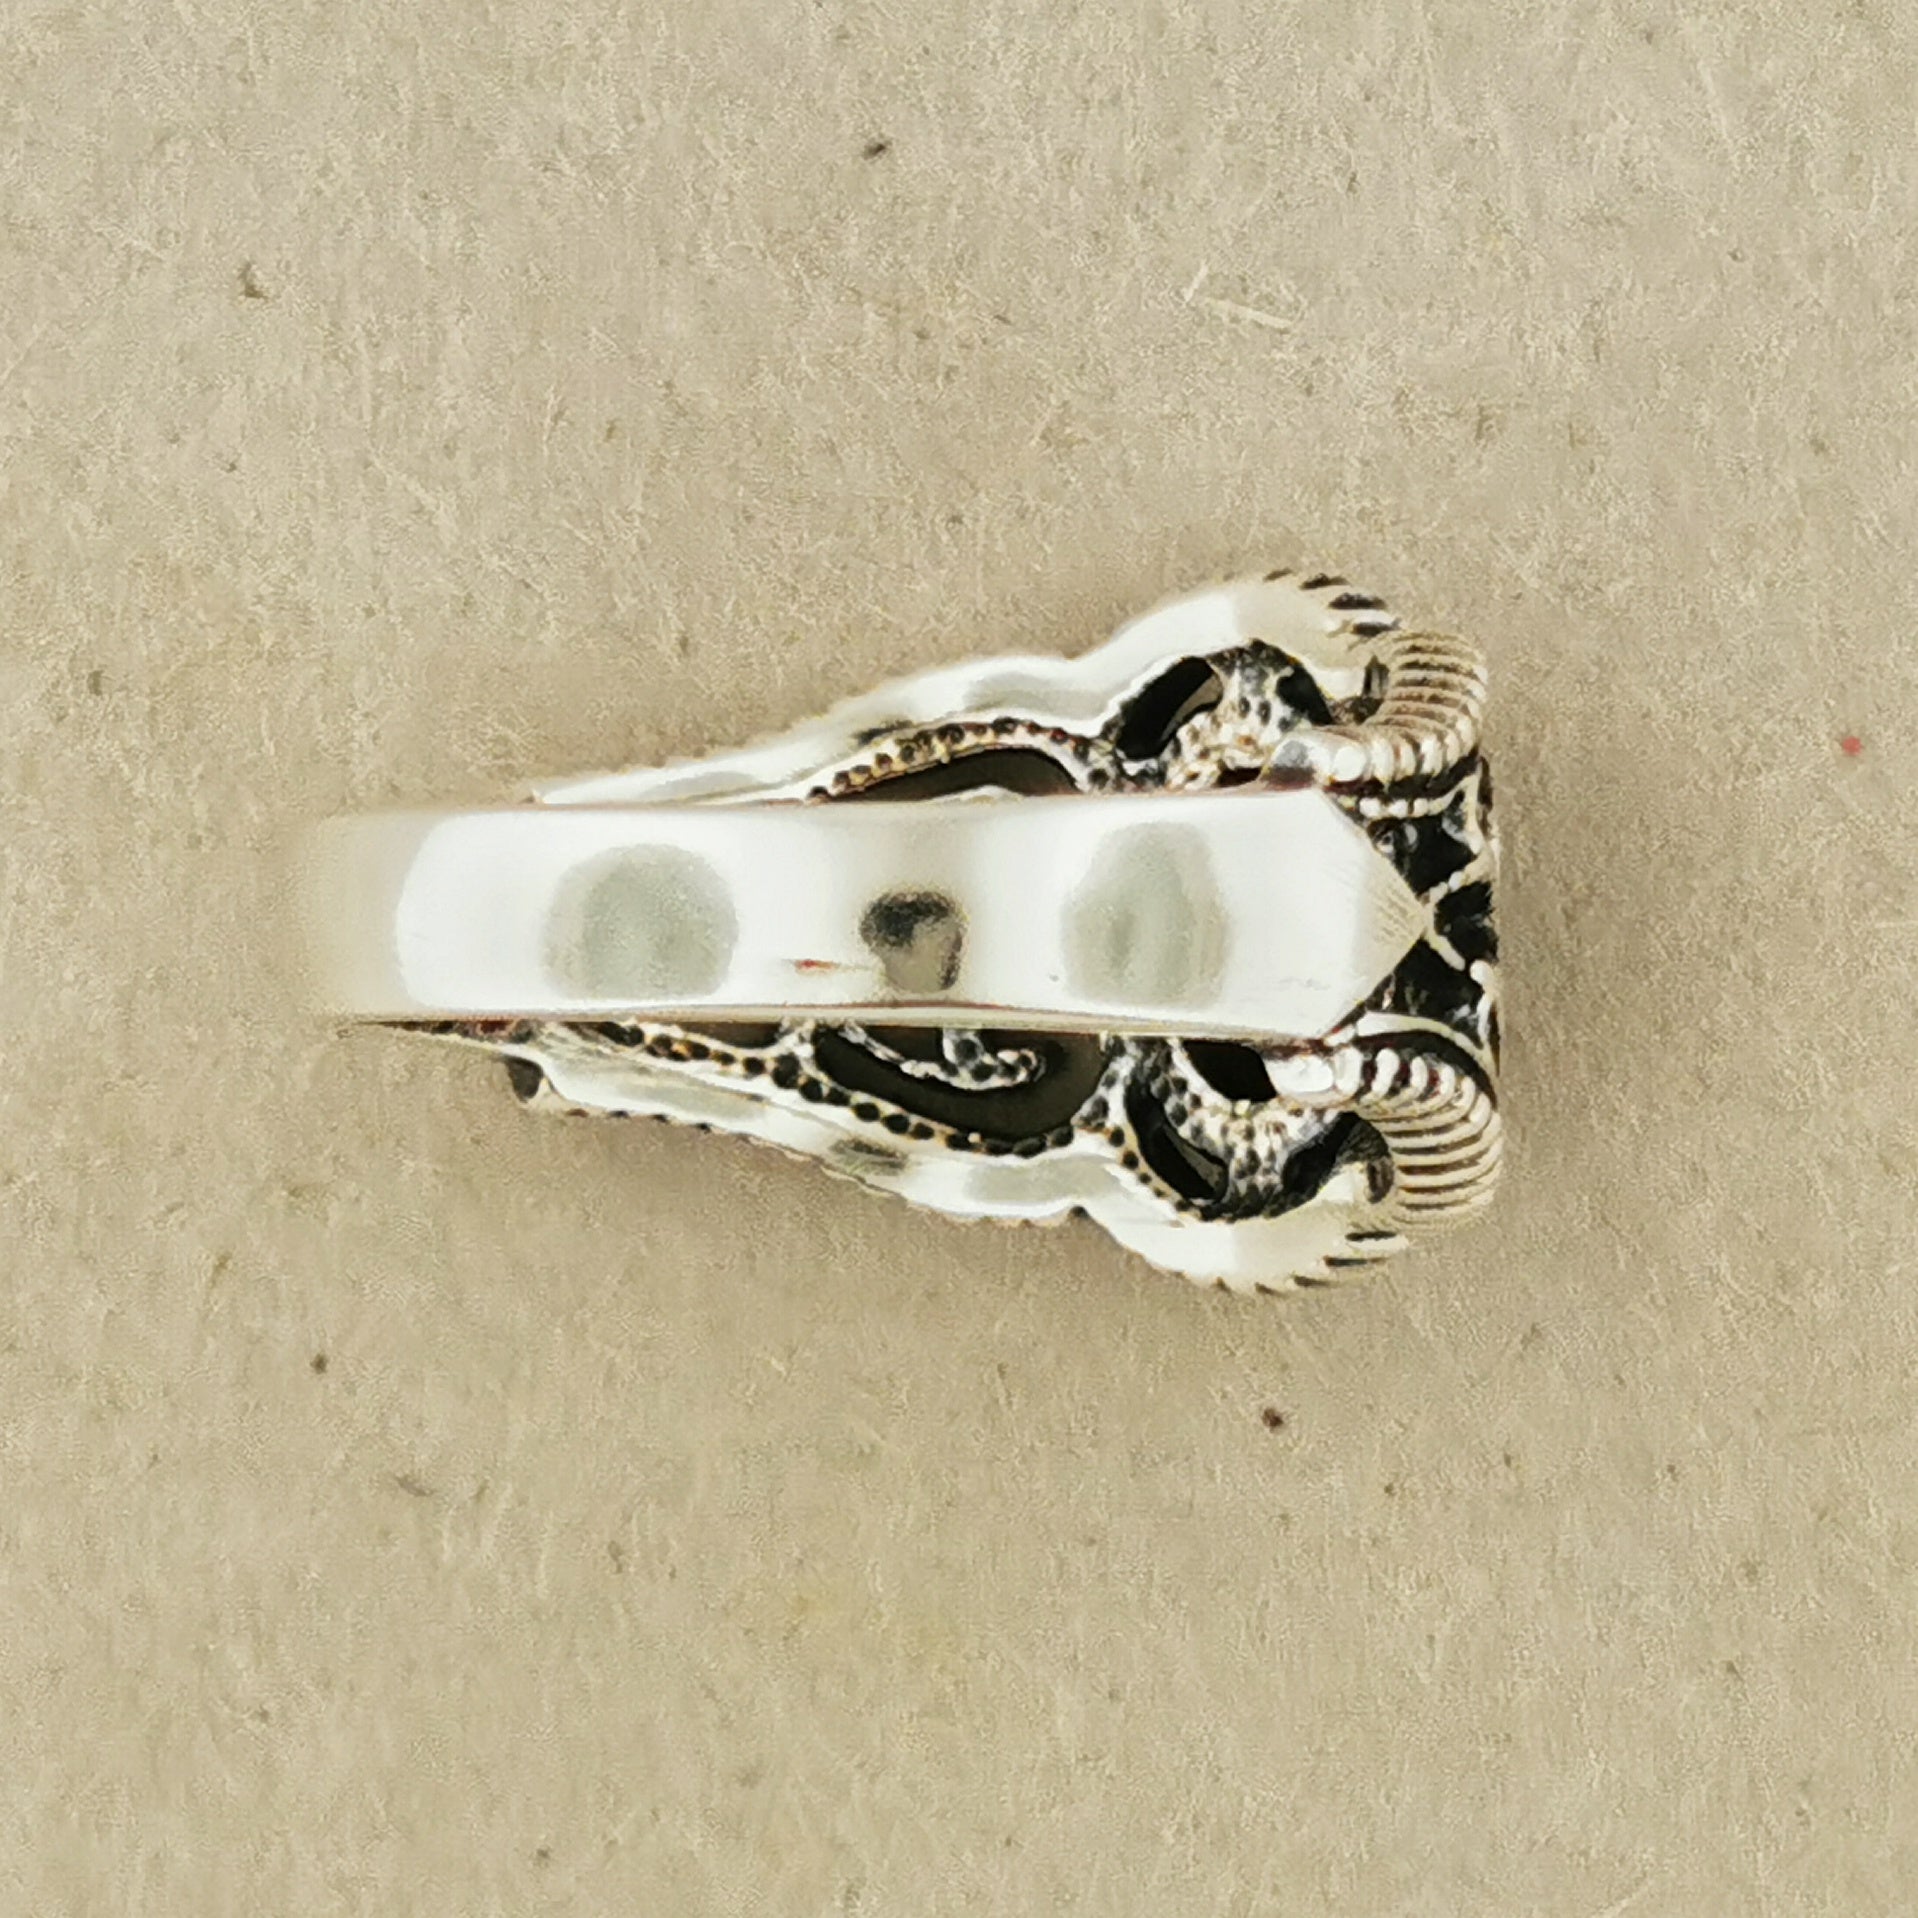 Vintage Style Filigree Ring with Gemstone in Sterling Silver, Gothic Style Ring, Victorian Style Ring, 1950 Style Ring, Silver Filigree Ring, Gemstone Filigree Ring, Mid Century Gemstone Ring, 1950s Silver Gemstone Ring, Filigree Silver Gemstone Ring